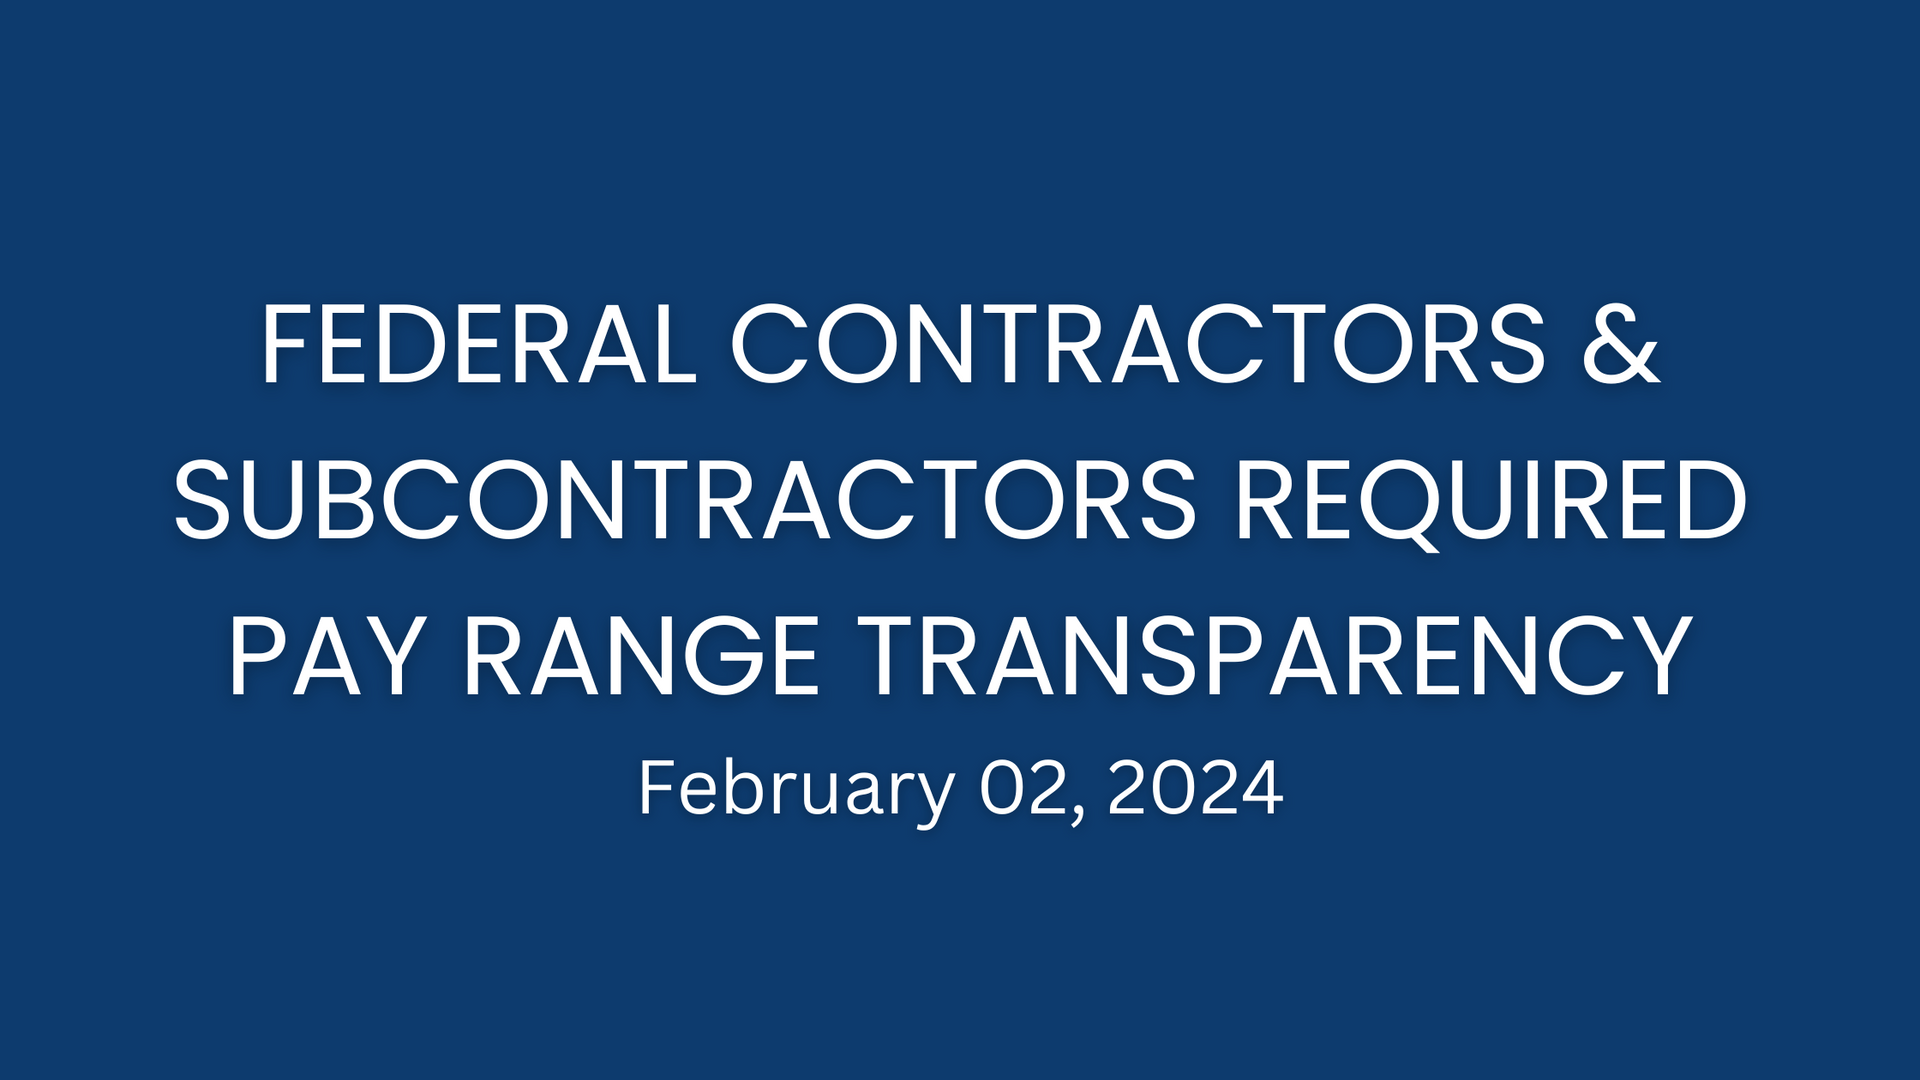 Federal Contractors & Subcontractors Required Pay Range Transparency in Job Advertisements 